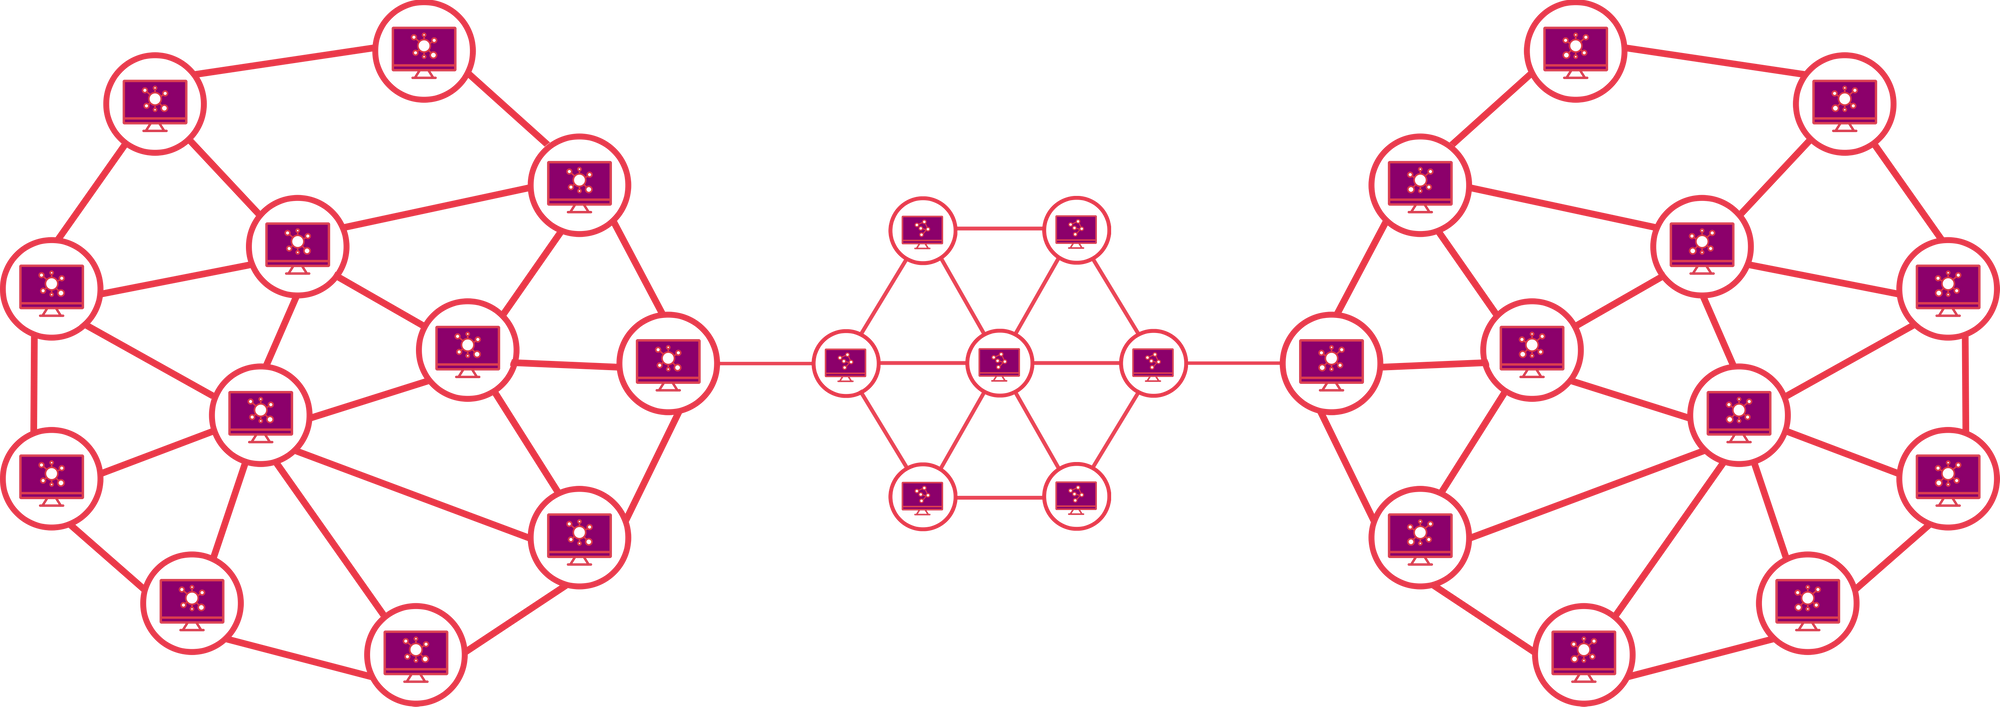 Two blockchain networks linked by a smaller decentralized oracle network